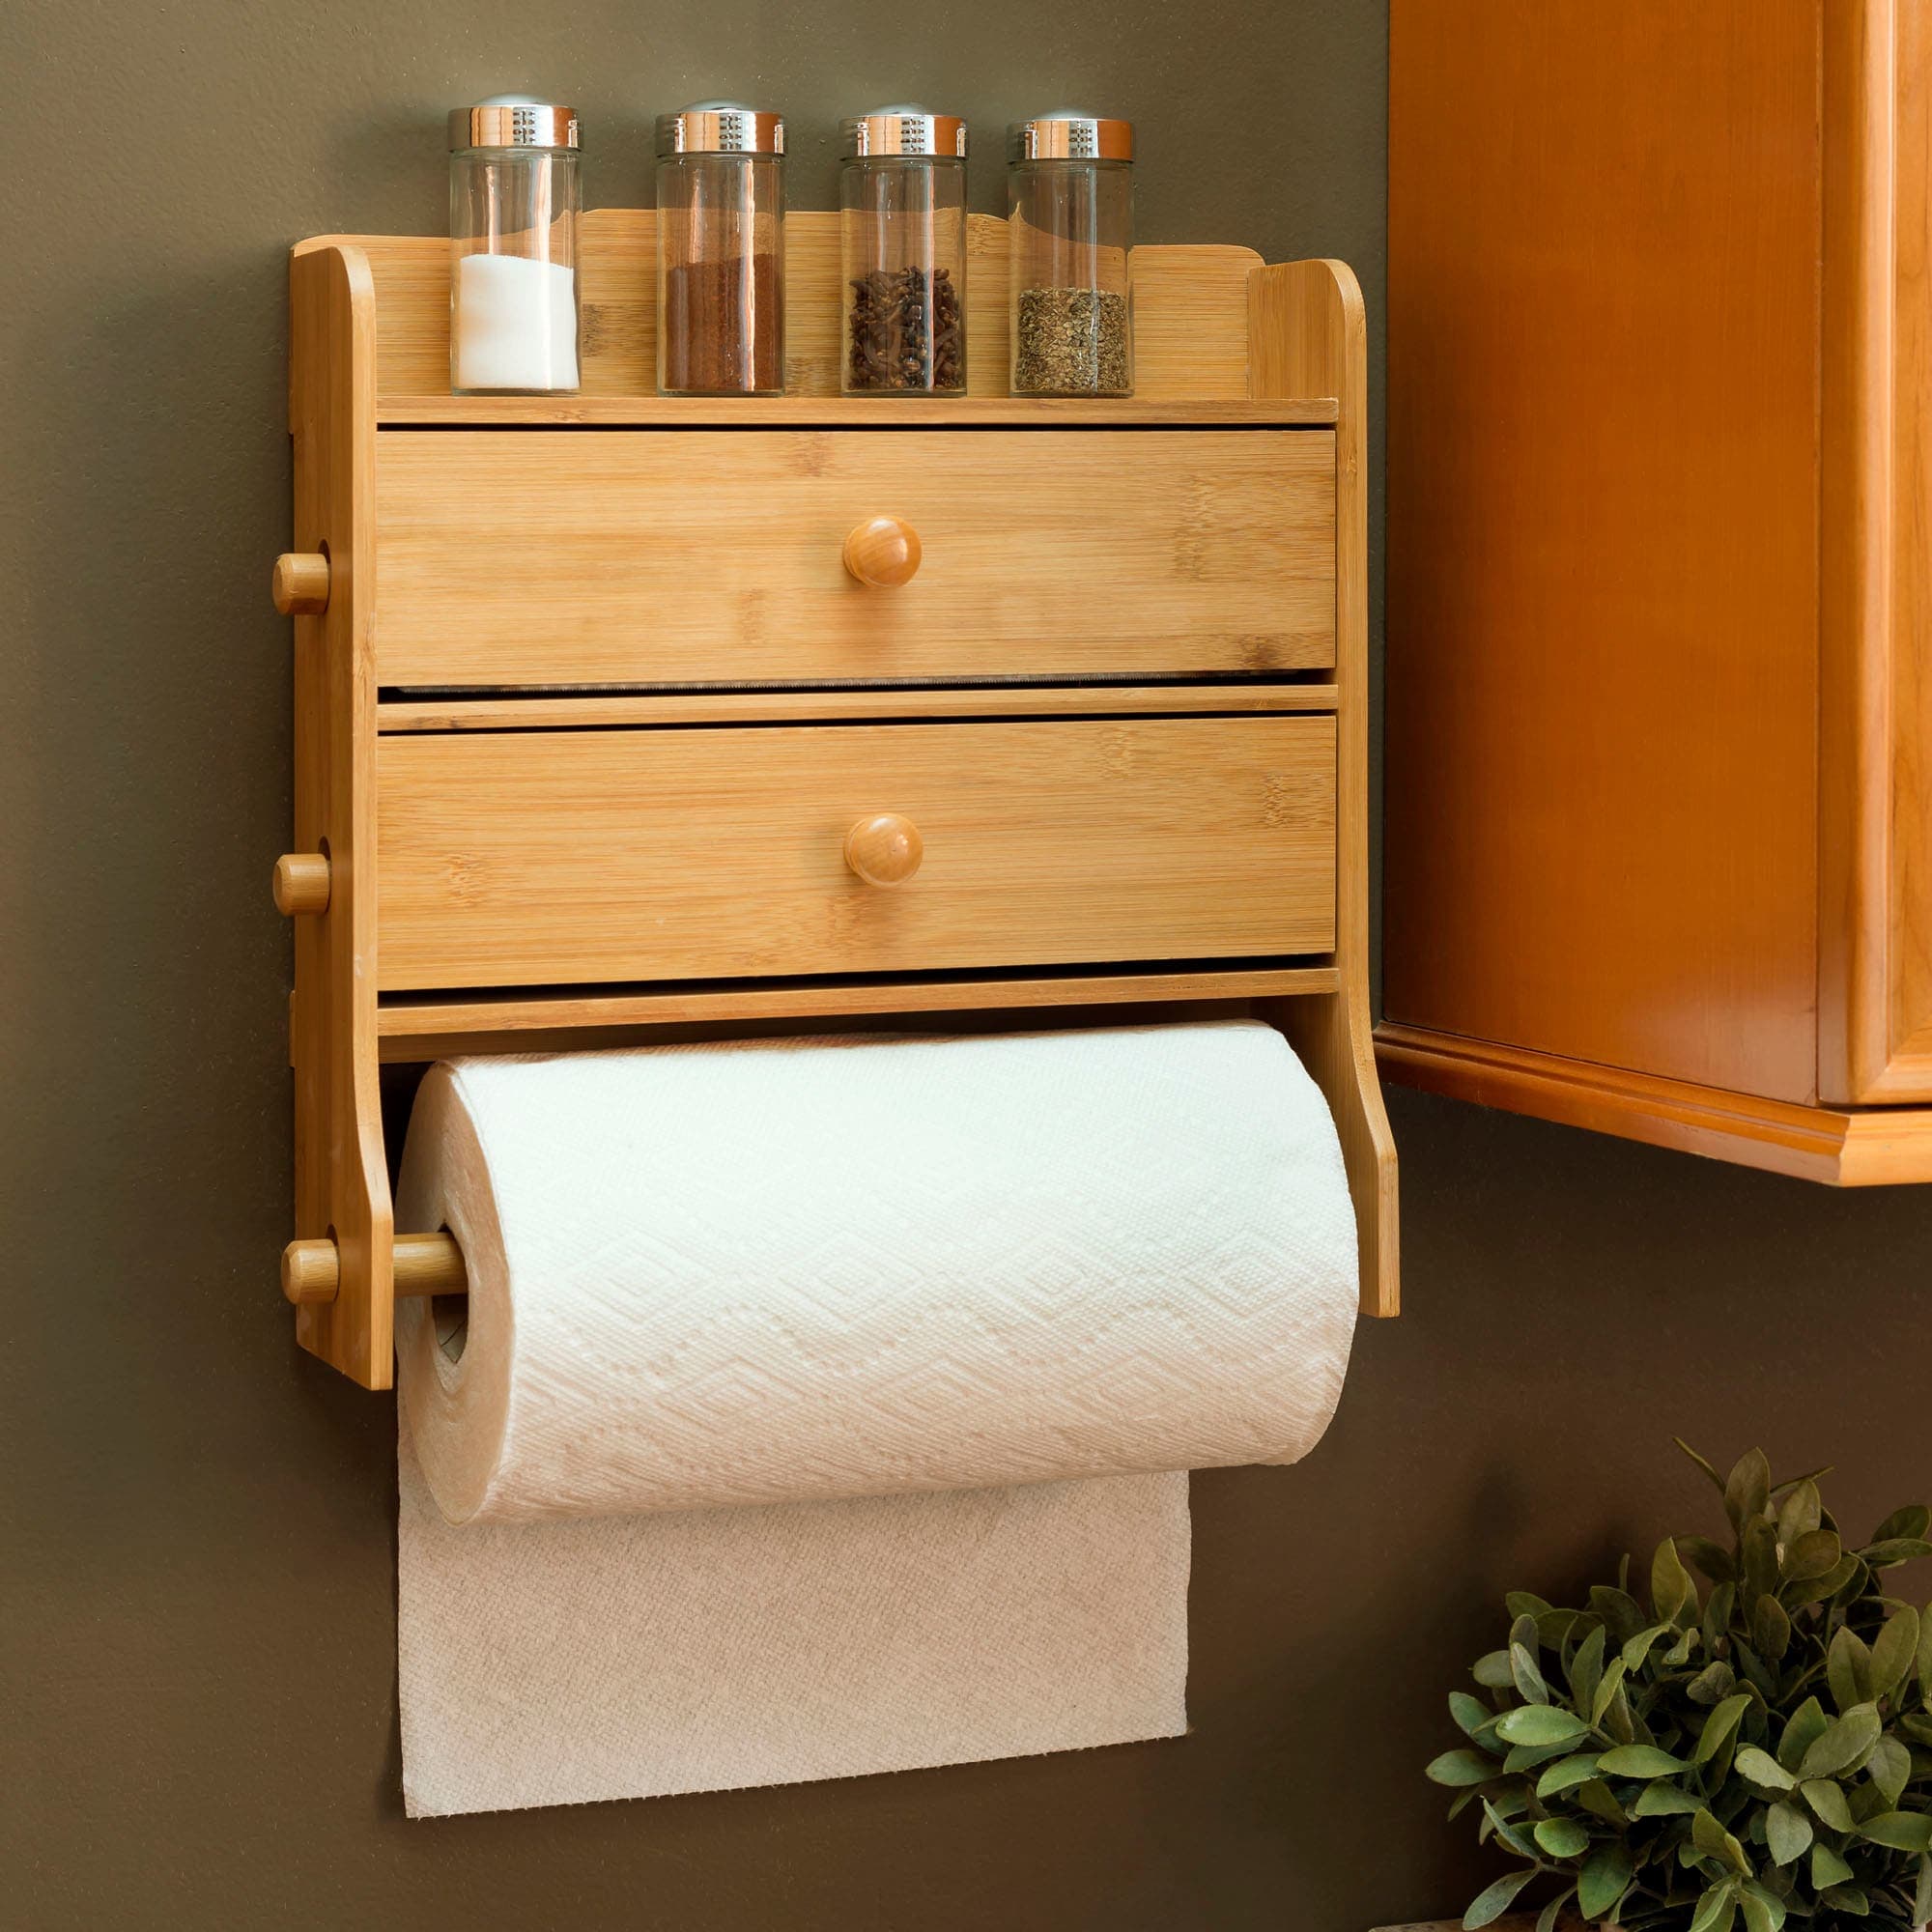 Home Basics Paper Towel Holder with Integrated Wrap Dispenser $15.00 EACH, CASE PACK OF 6